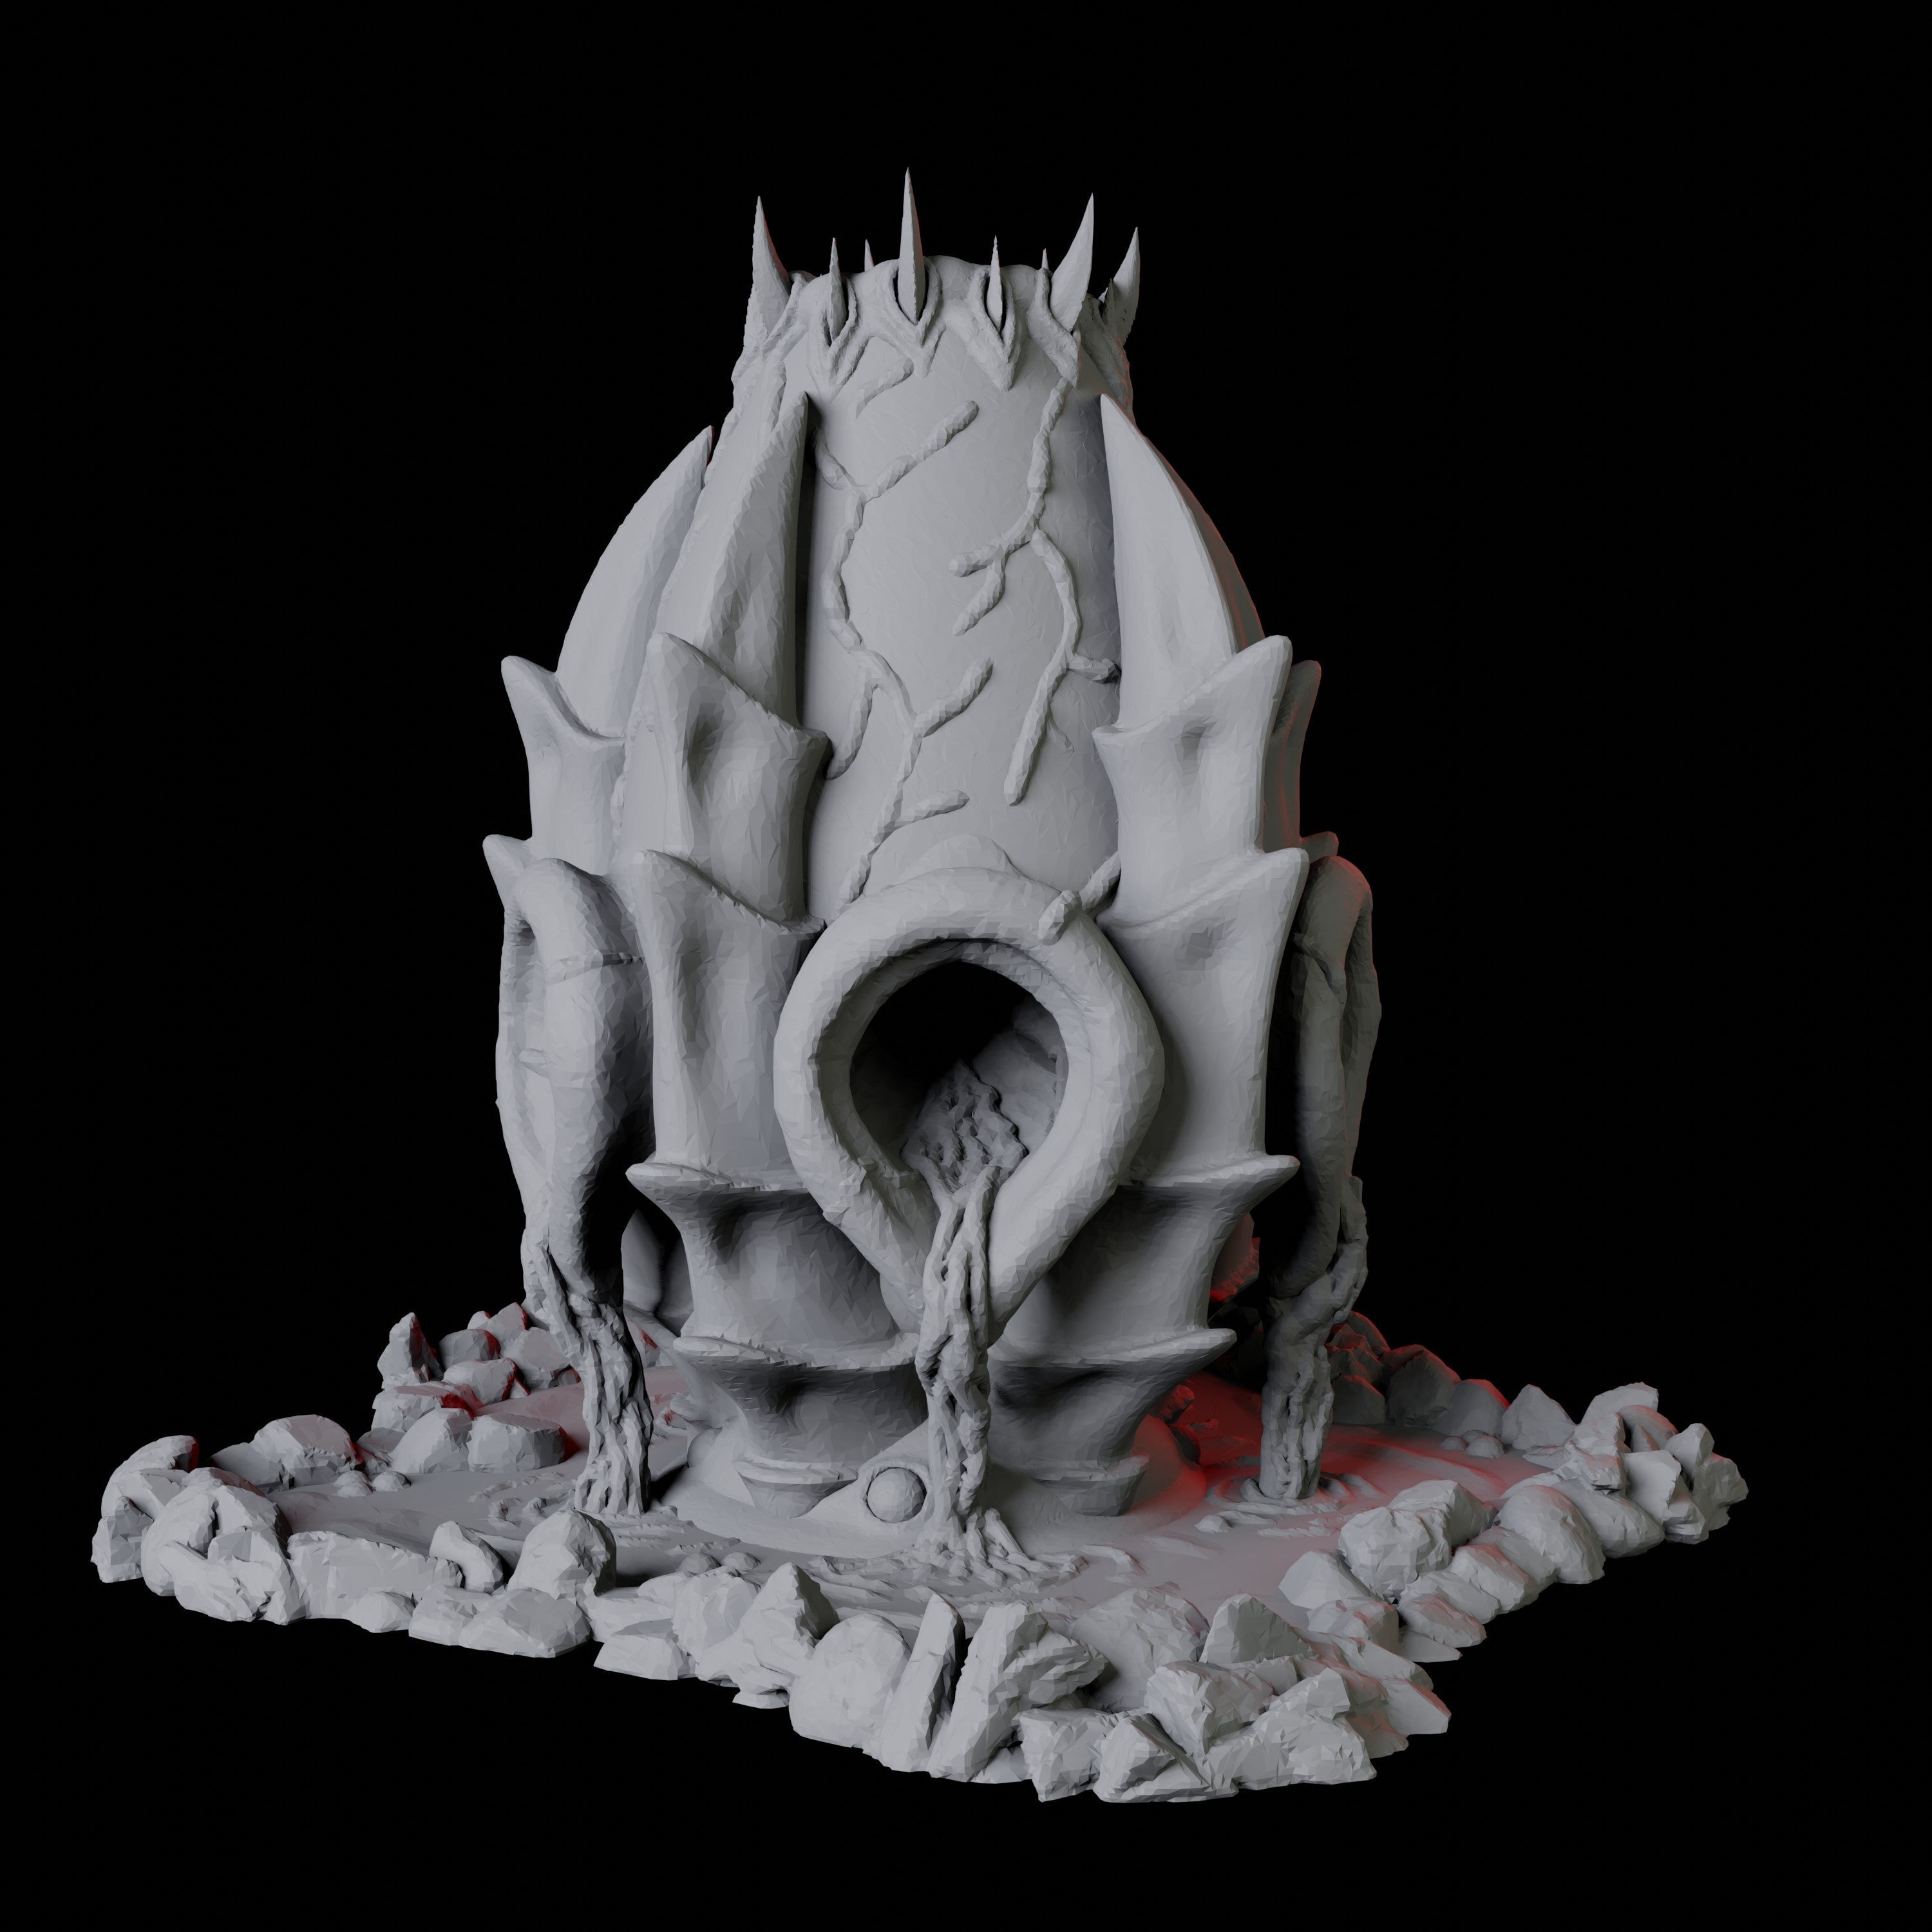 Alien Egg Dice Tower Miniature for Dungeons and Dragons